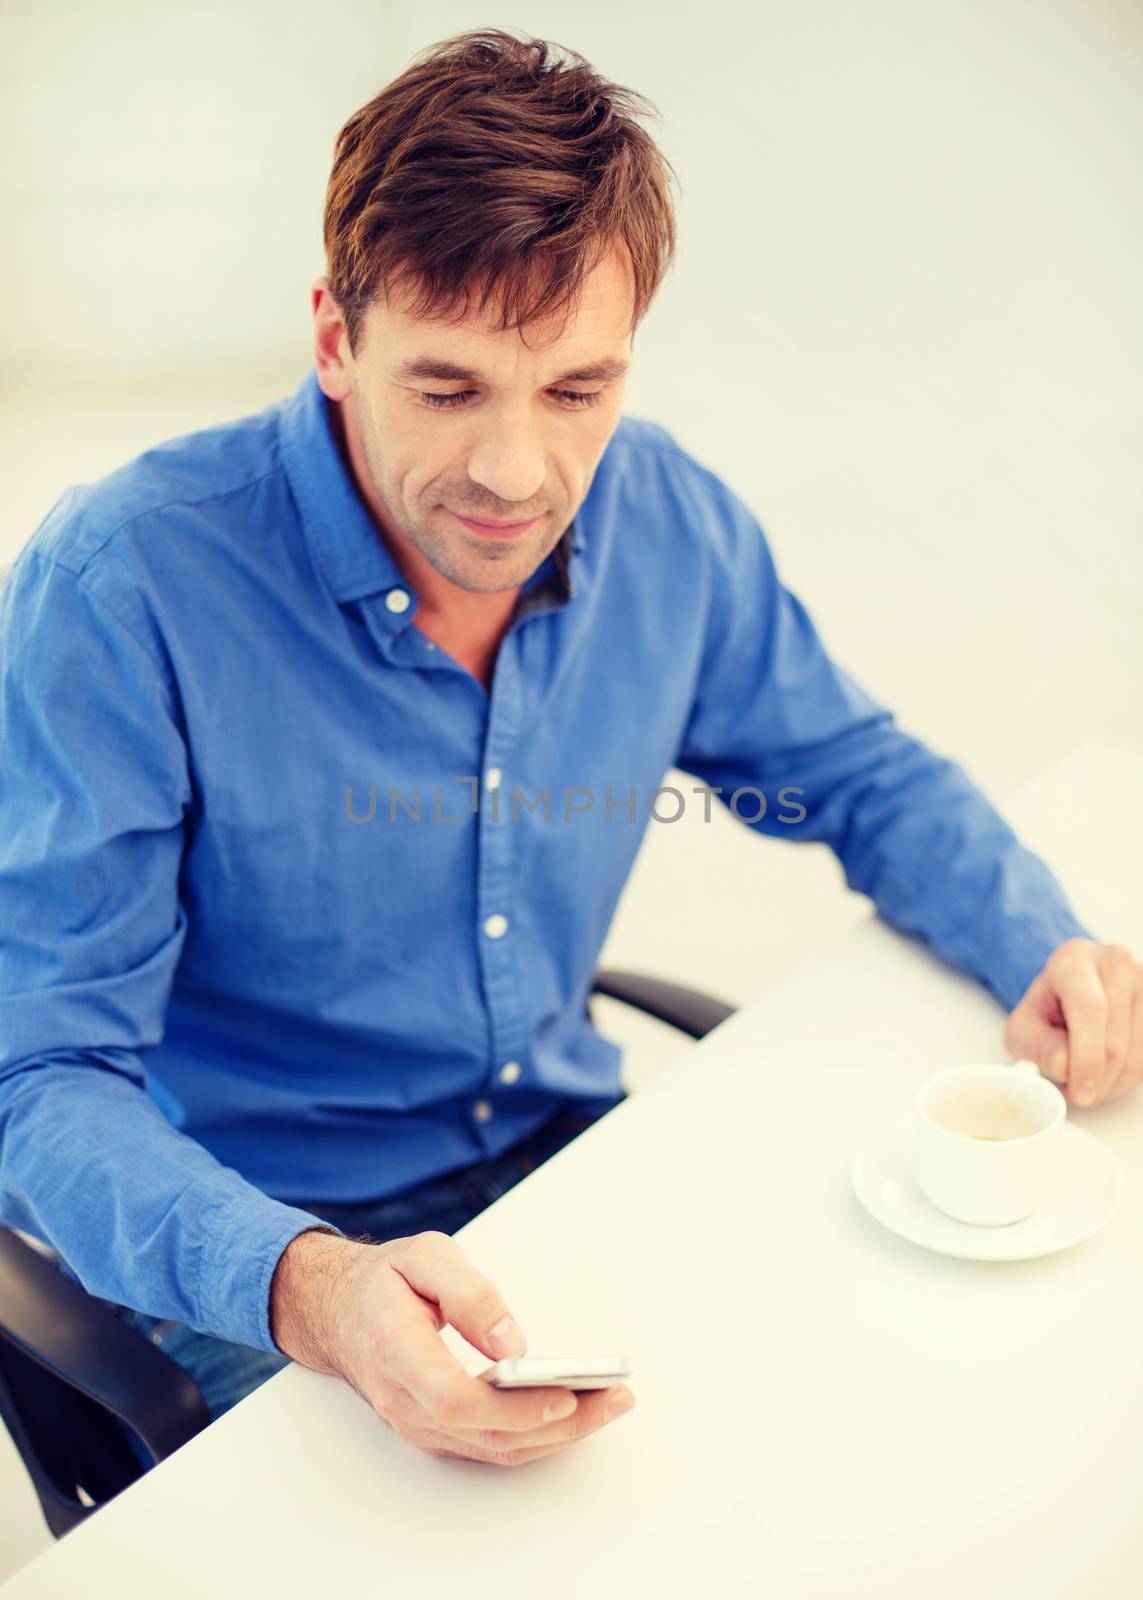 buisnessman with smartphone and cup of coffee by dolgachov